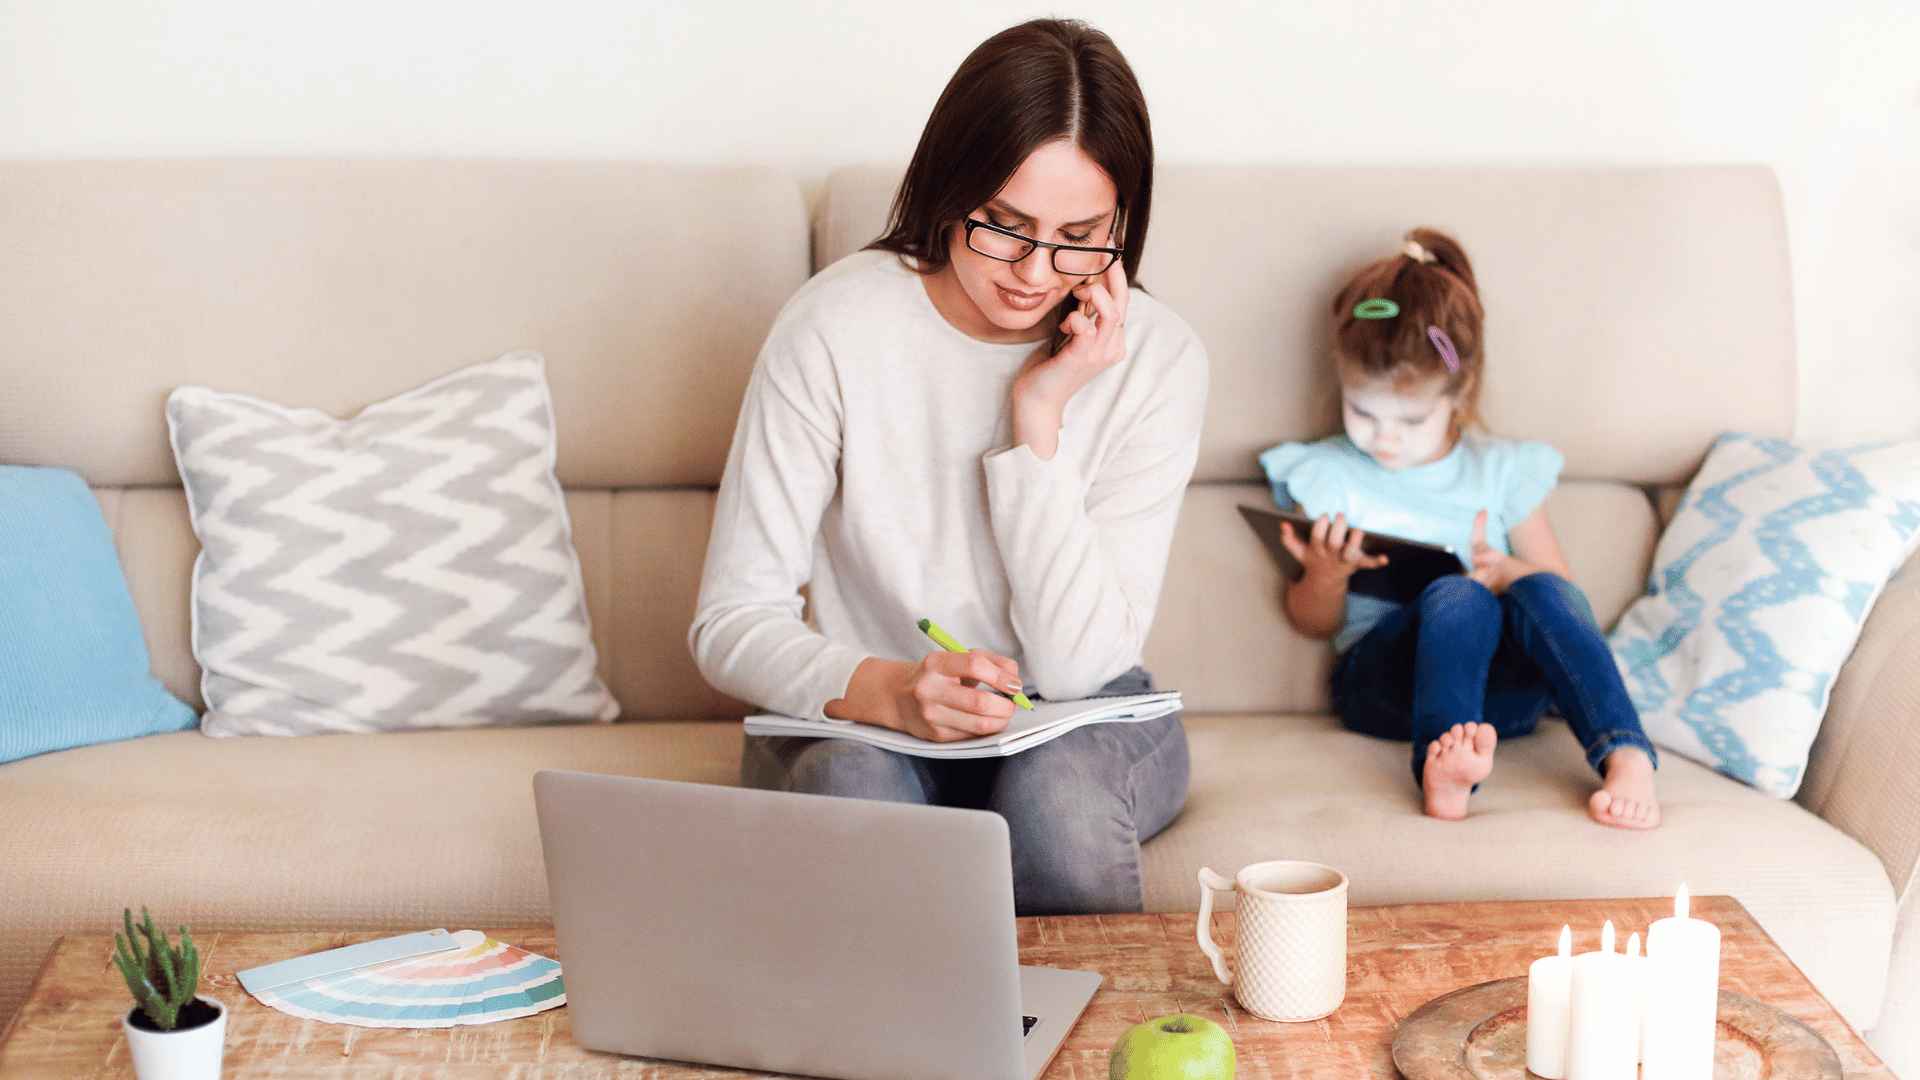 11 Essential Work from Home Tips